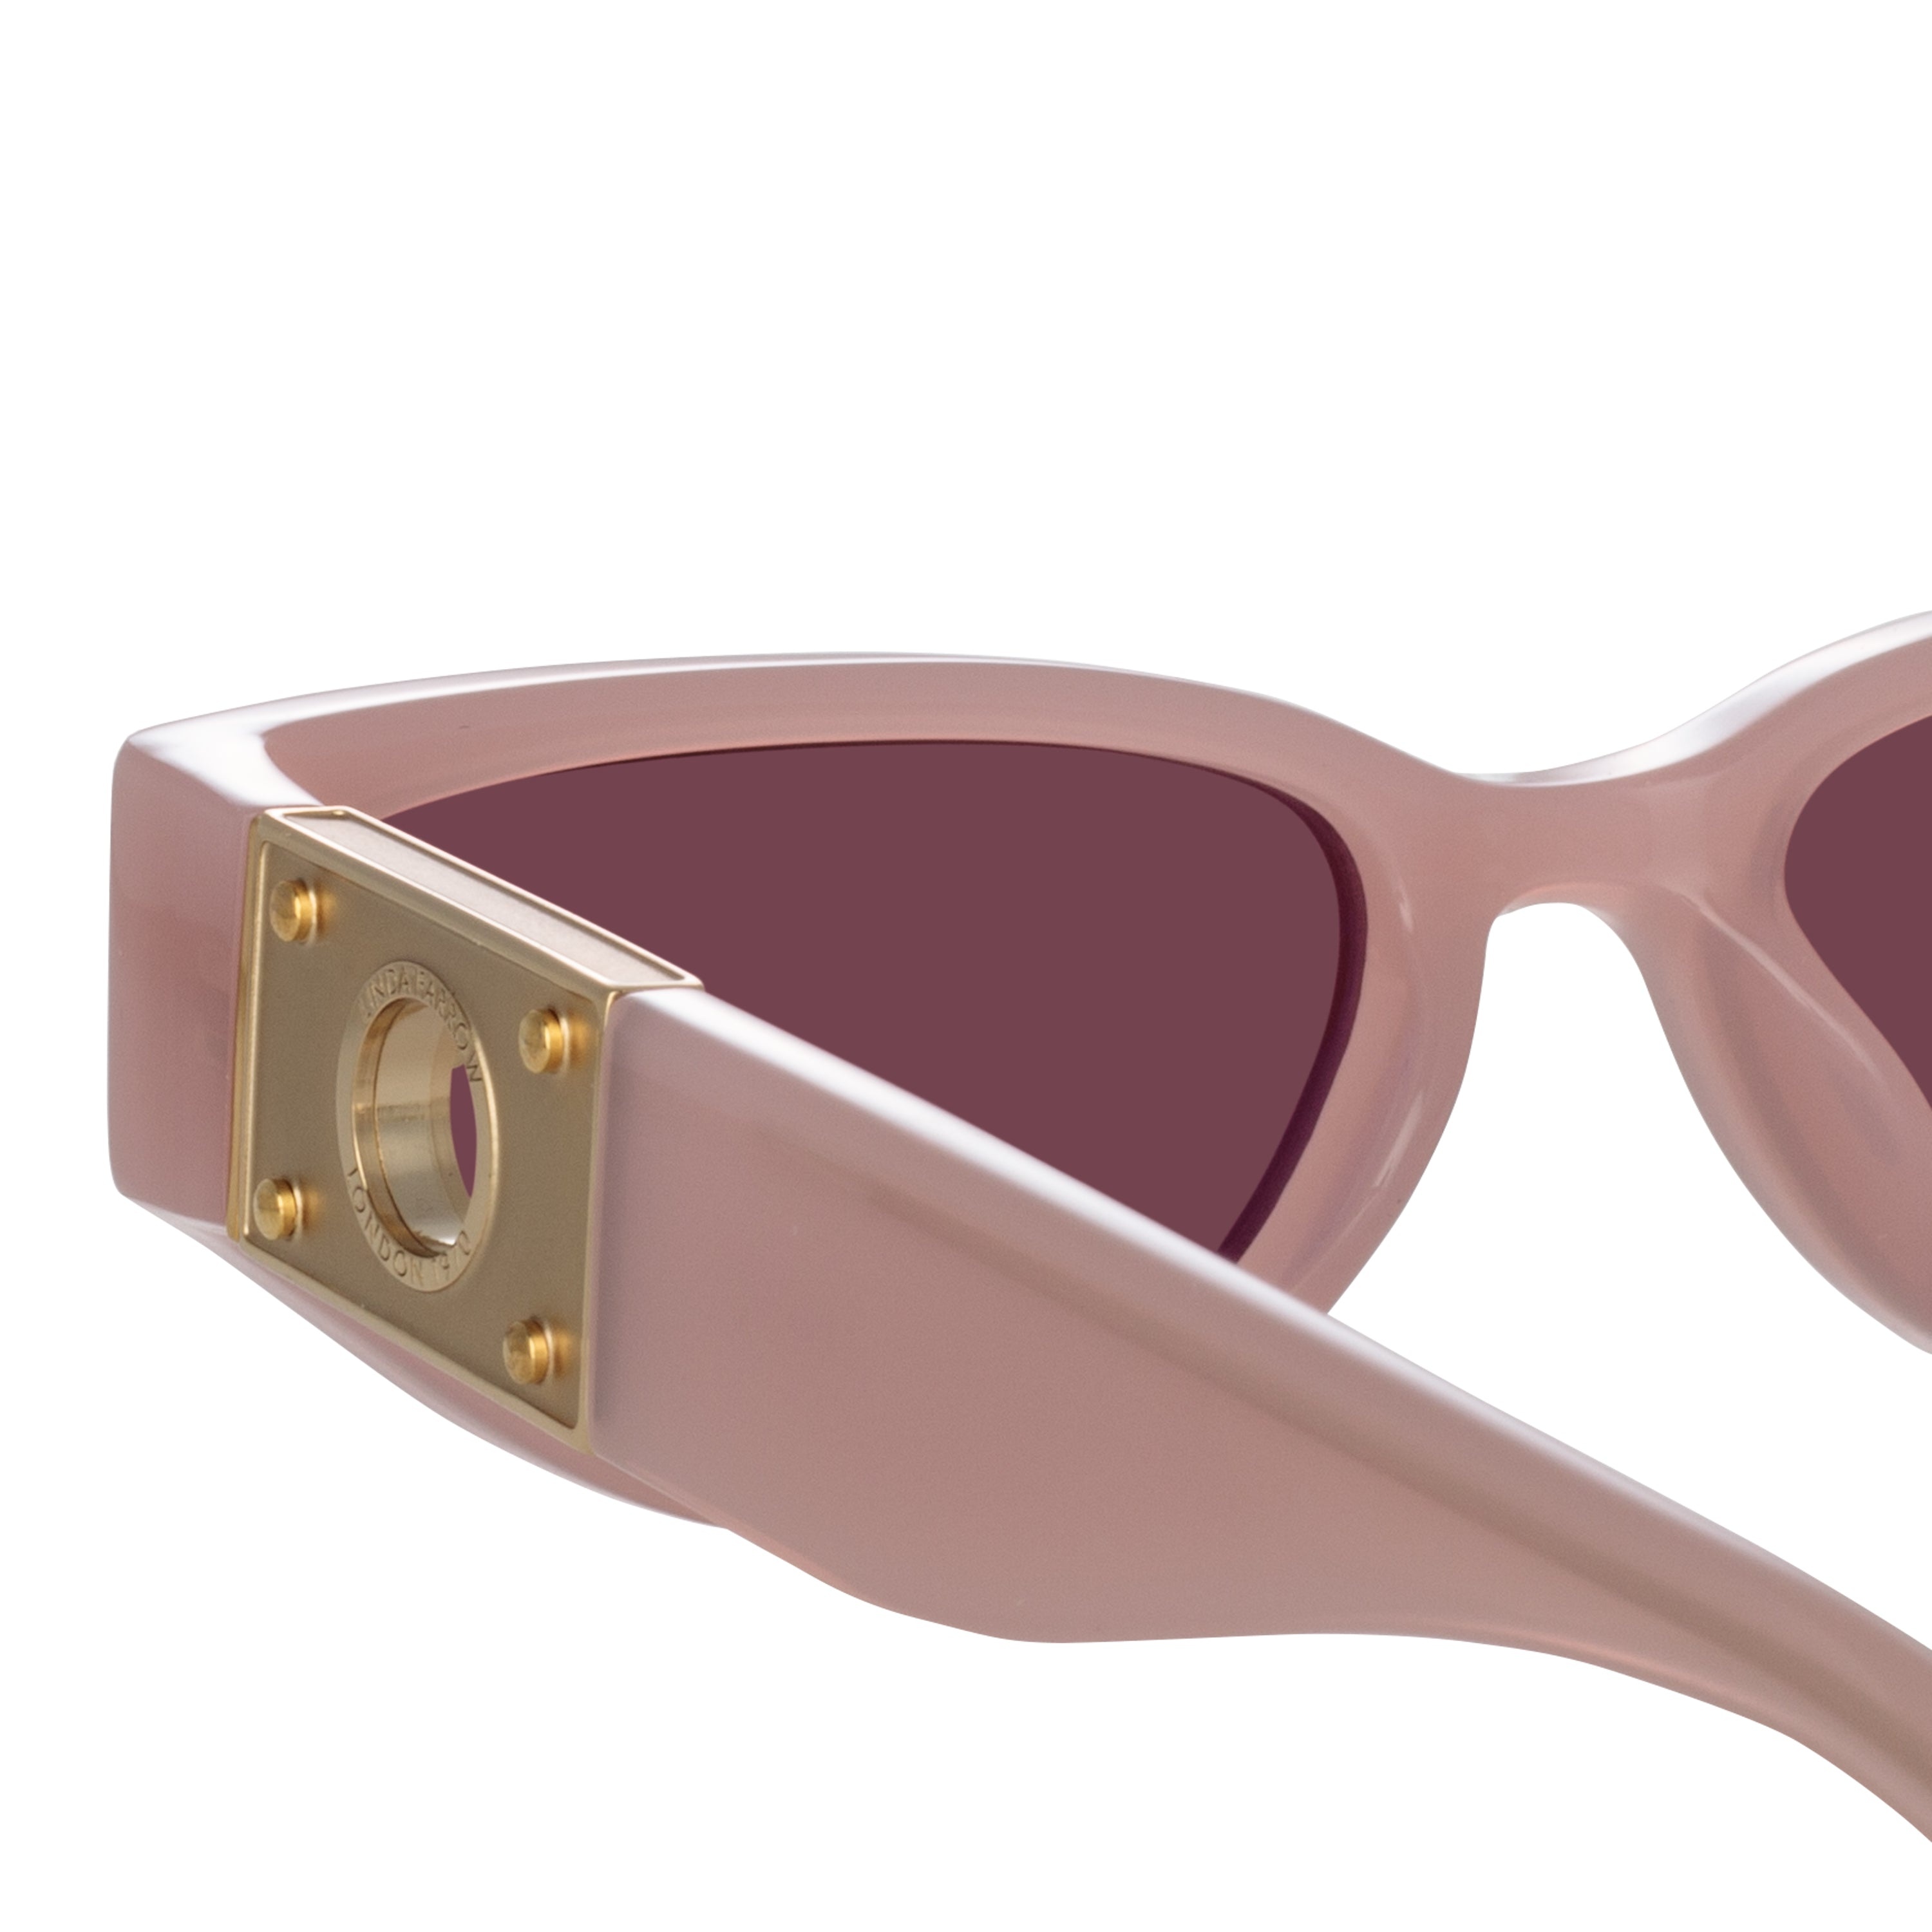 TOMIE CAT EYE SUNGLASSES IN LILAC - 6